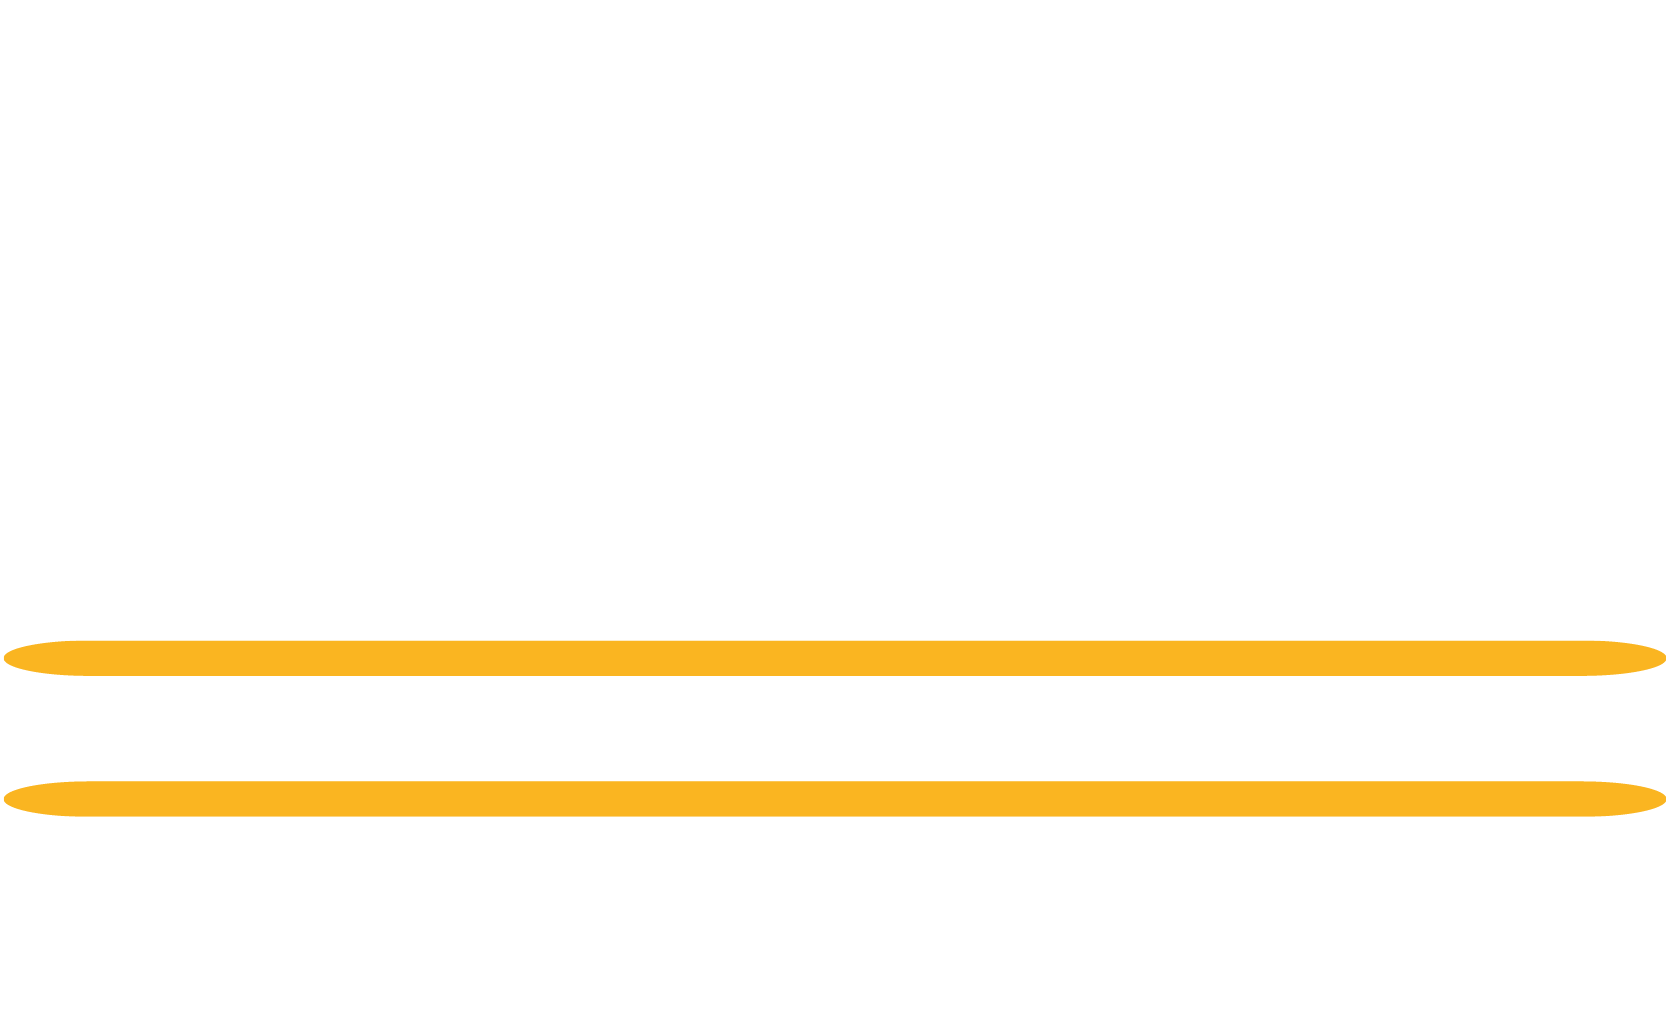 Stage Padel Barcelone